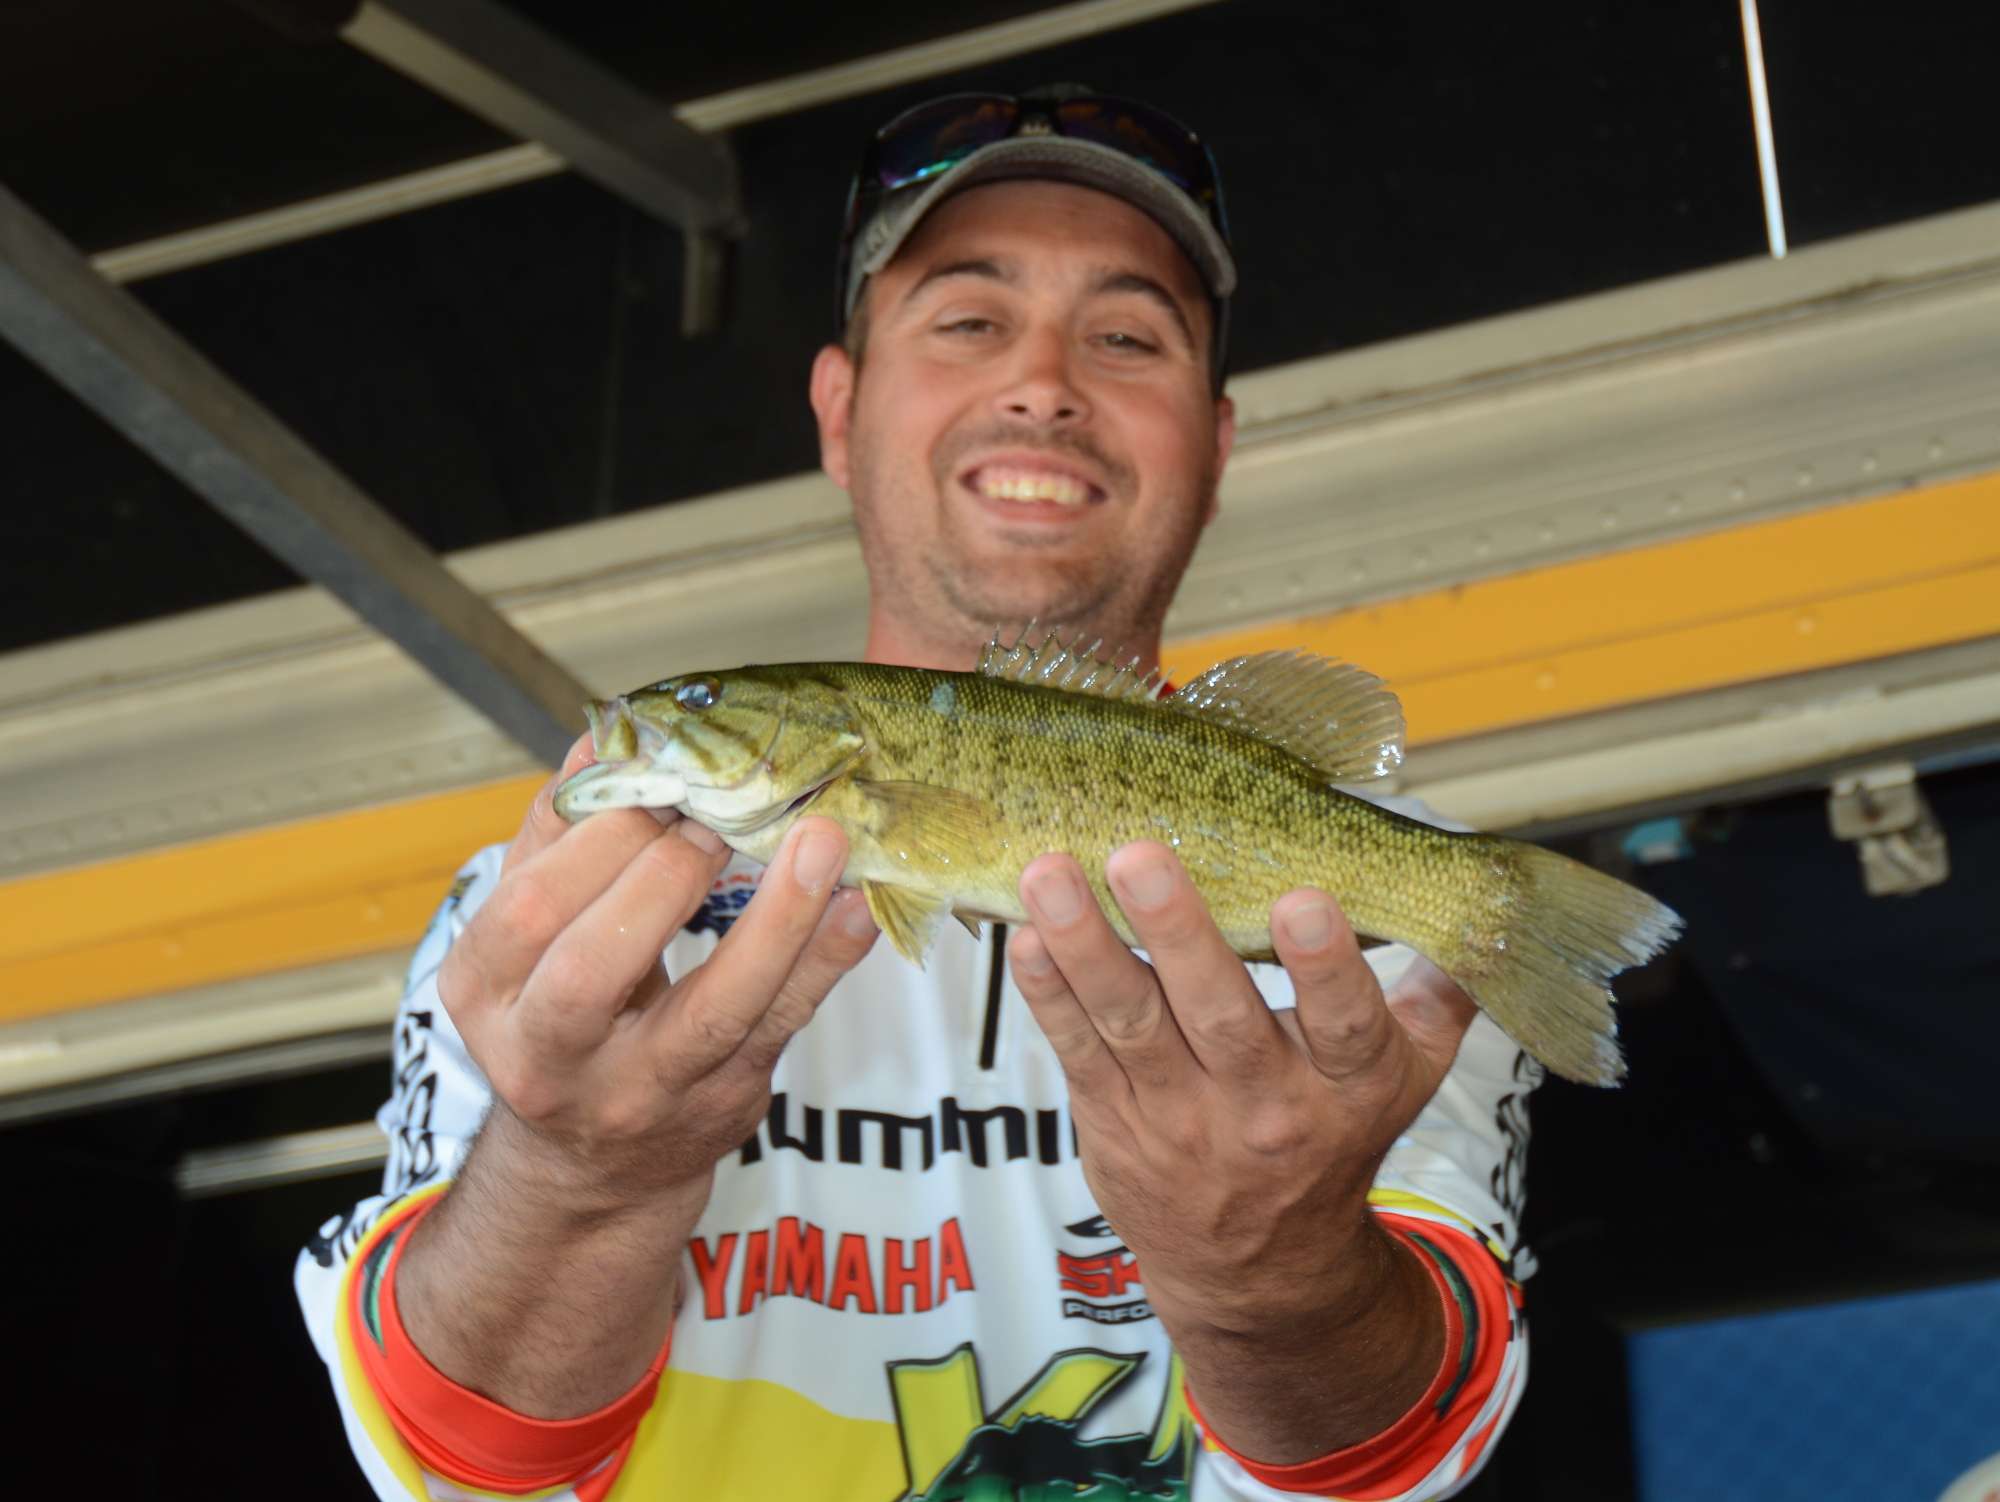 Carlos Montoya Martinez, Spain, with the tournament's smallest bass -- only 9 ounces!